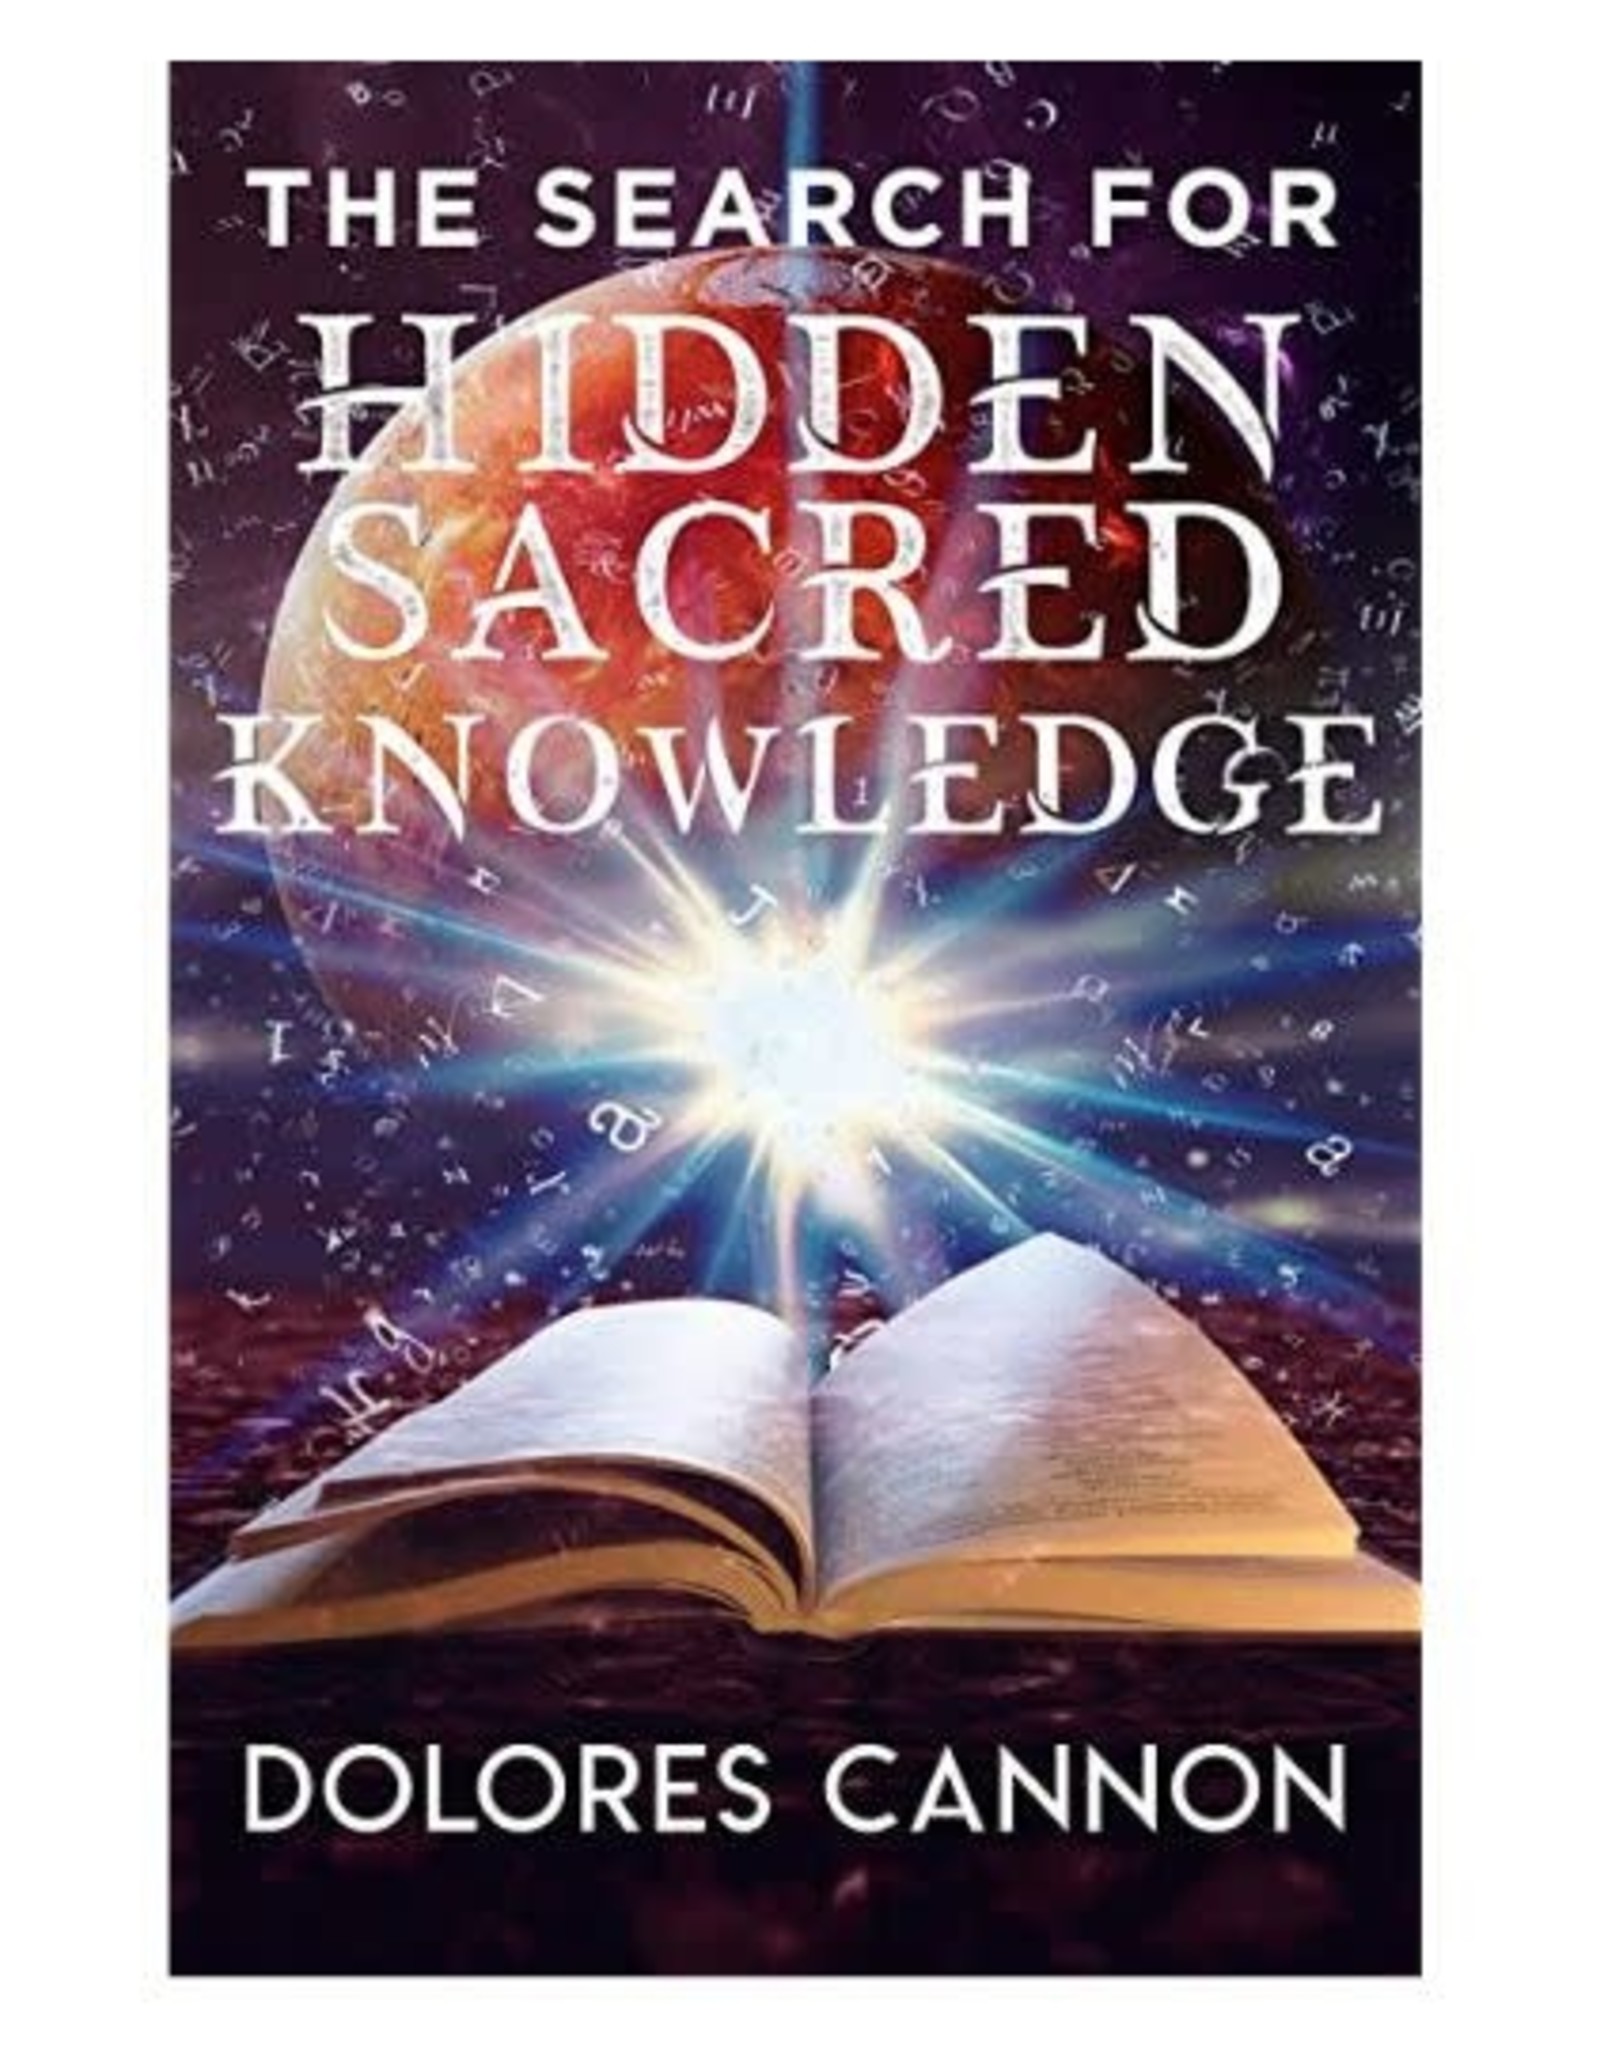 Search for Hidden Sacred Knowledge by Dolores Cannon